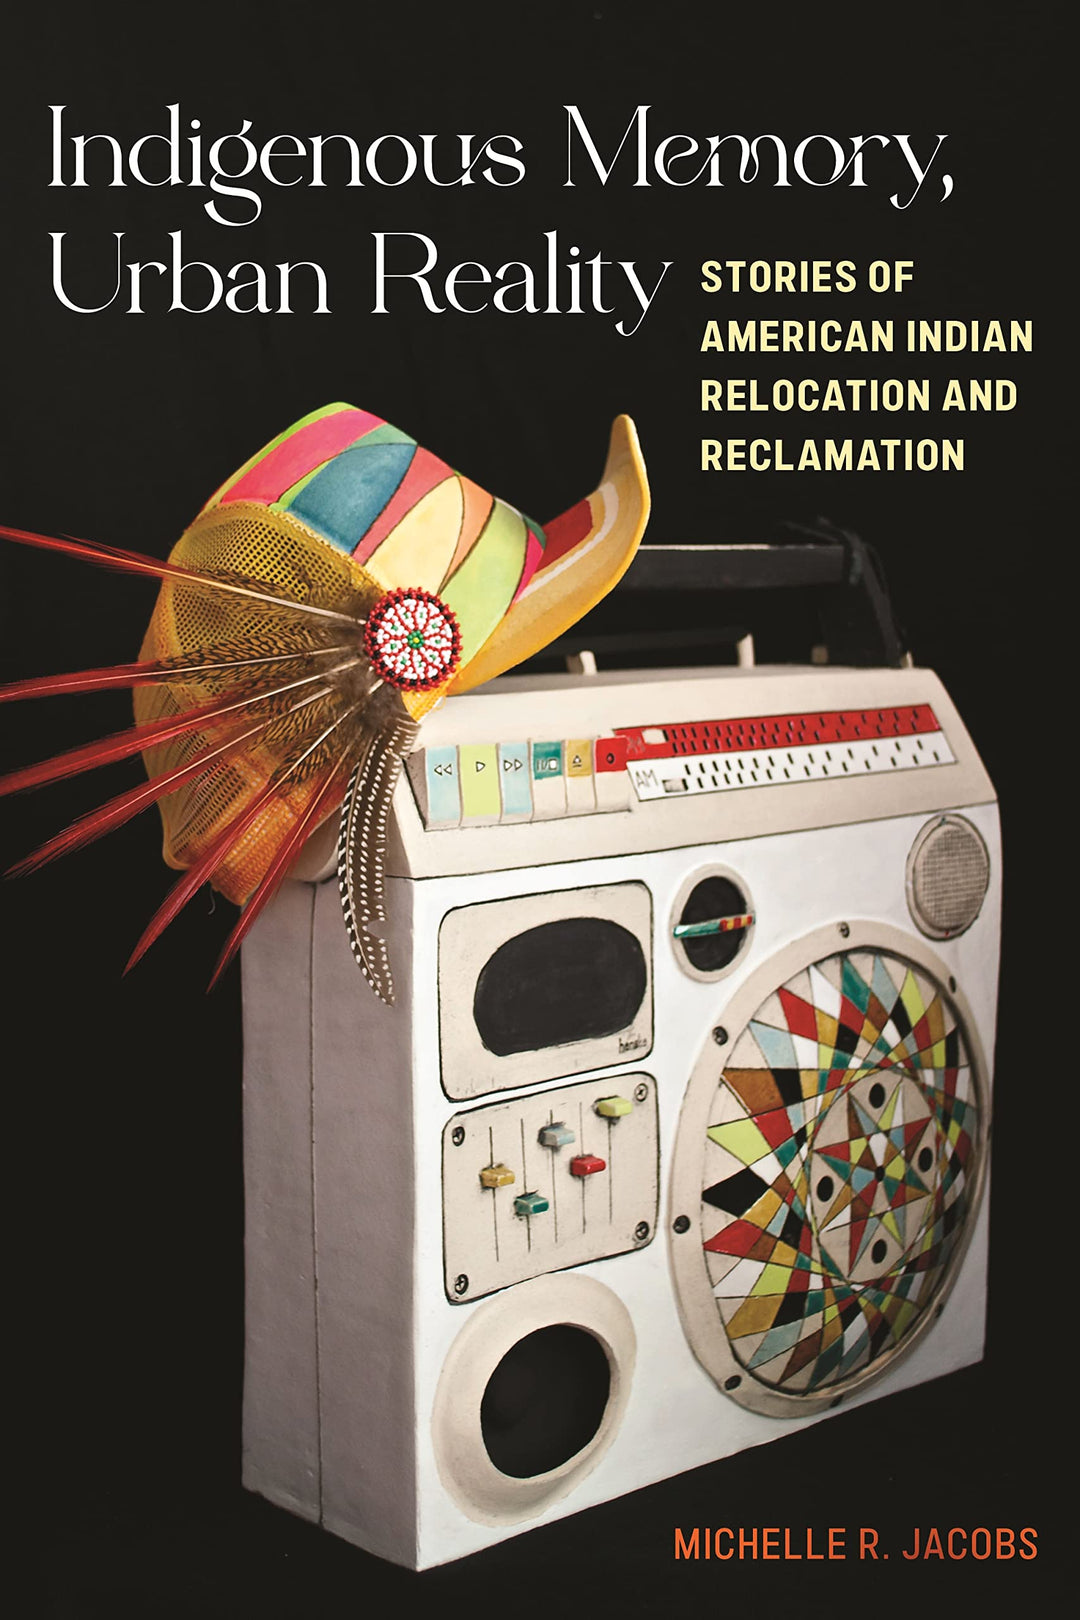 Indigenous Memory, Urban Reality: Stories of American Indian Relocation and Reclamation by Michelle R. Jacobs